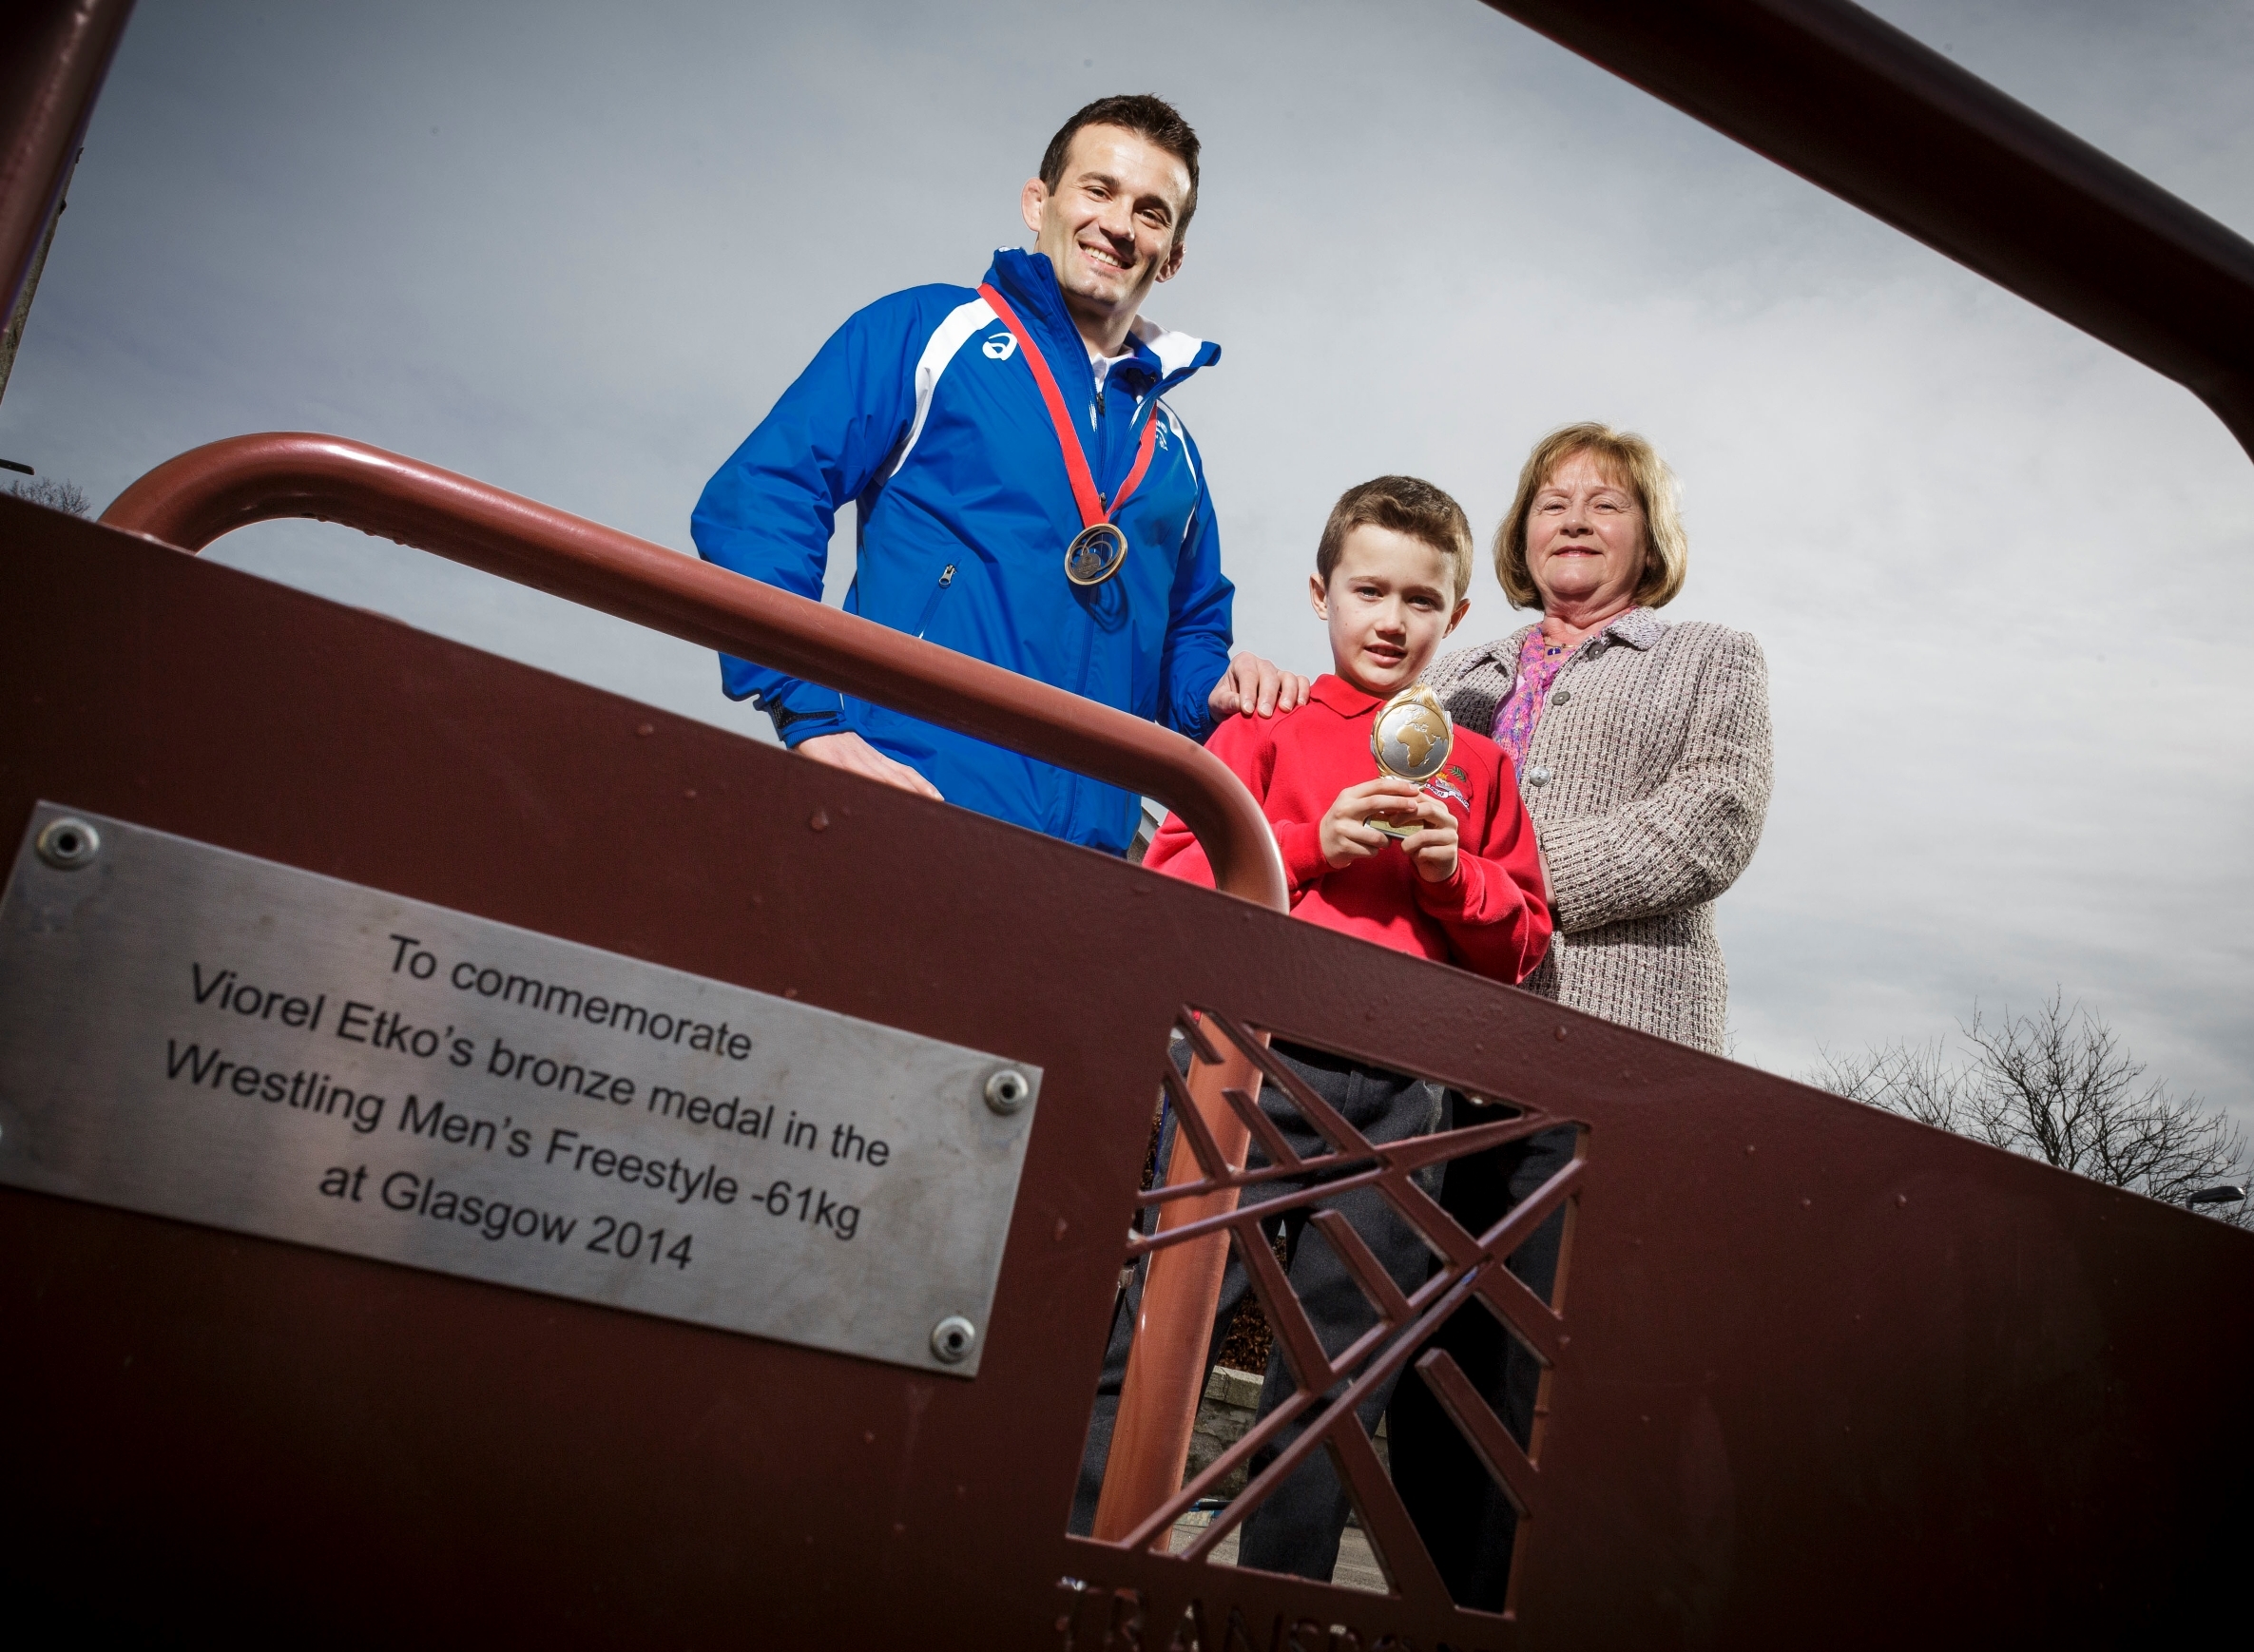 Wrestling champion Viorel Etko and son Leon joined Maureen Watt MSP unveil a commemorative bronze bike stand at Meldrum Primary in recognition of his Commonwealth Games success